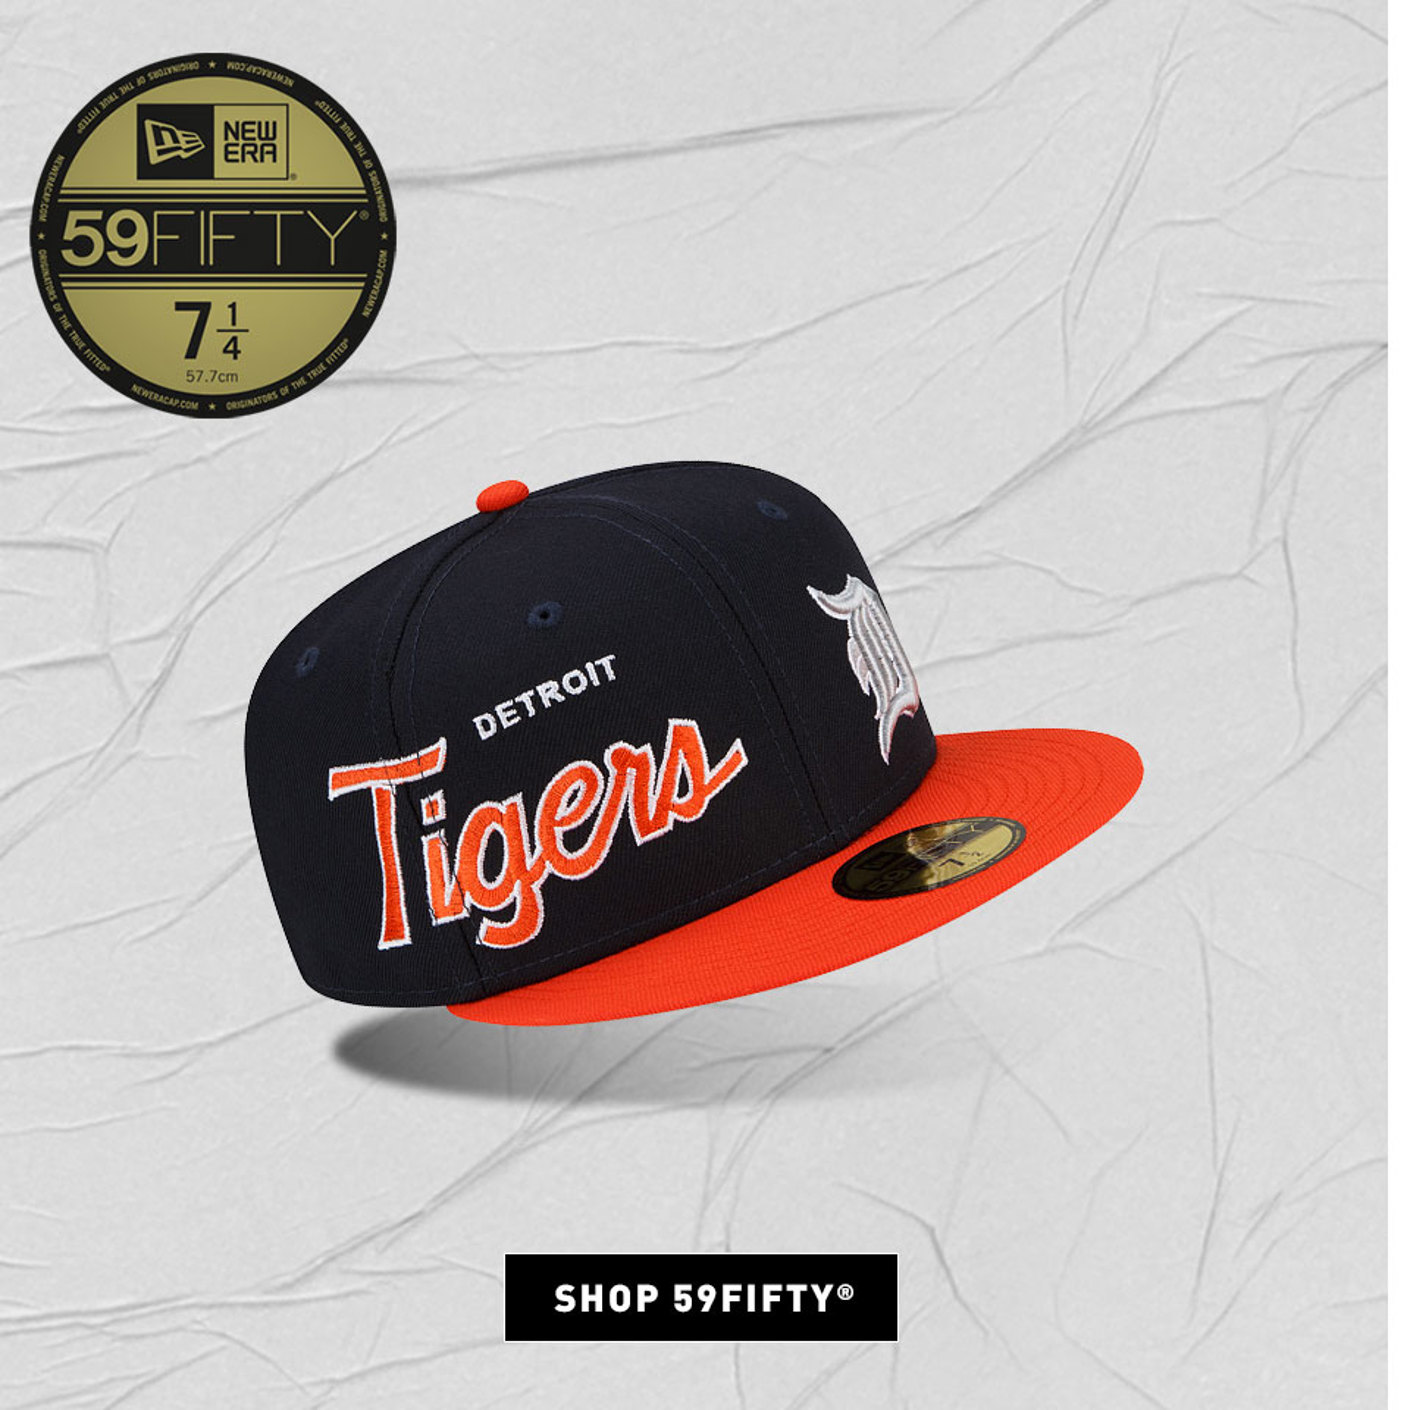 Button to shop 59FIFTY hats